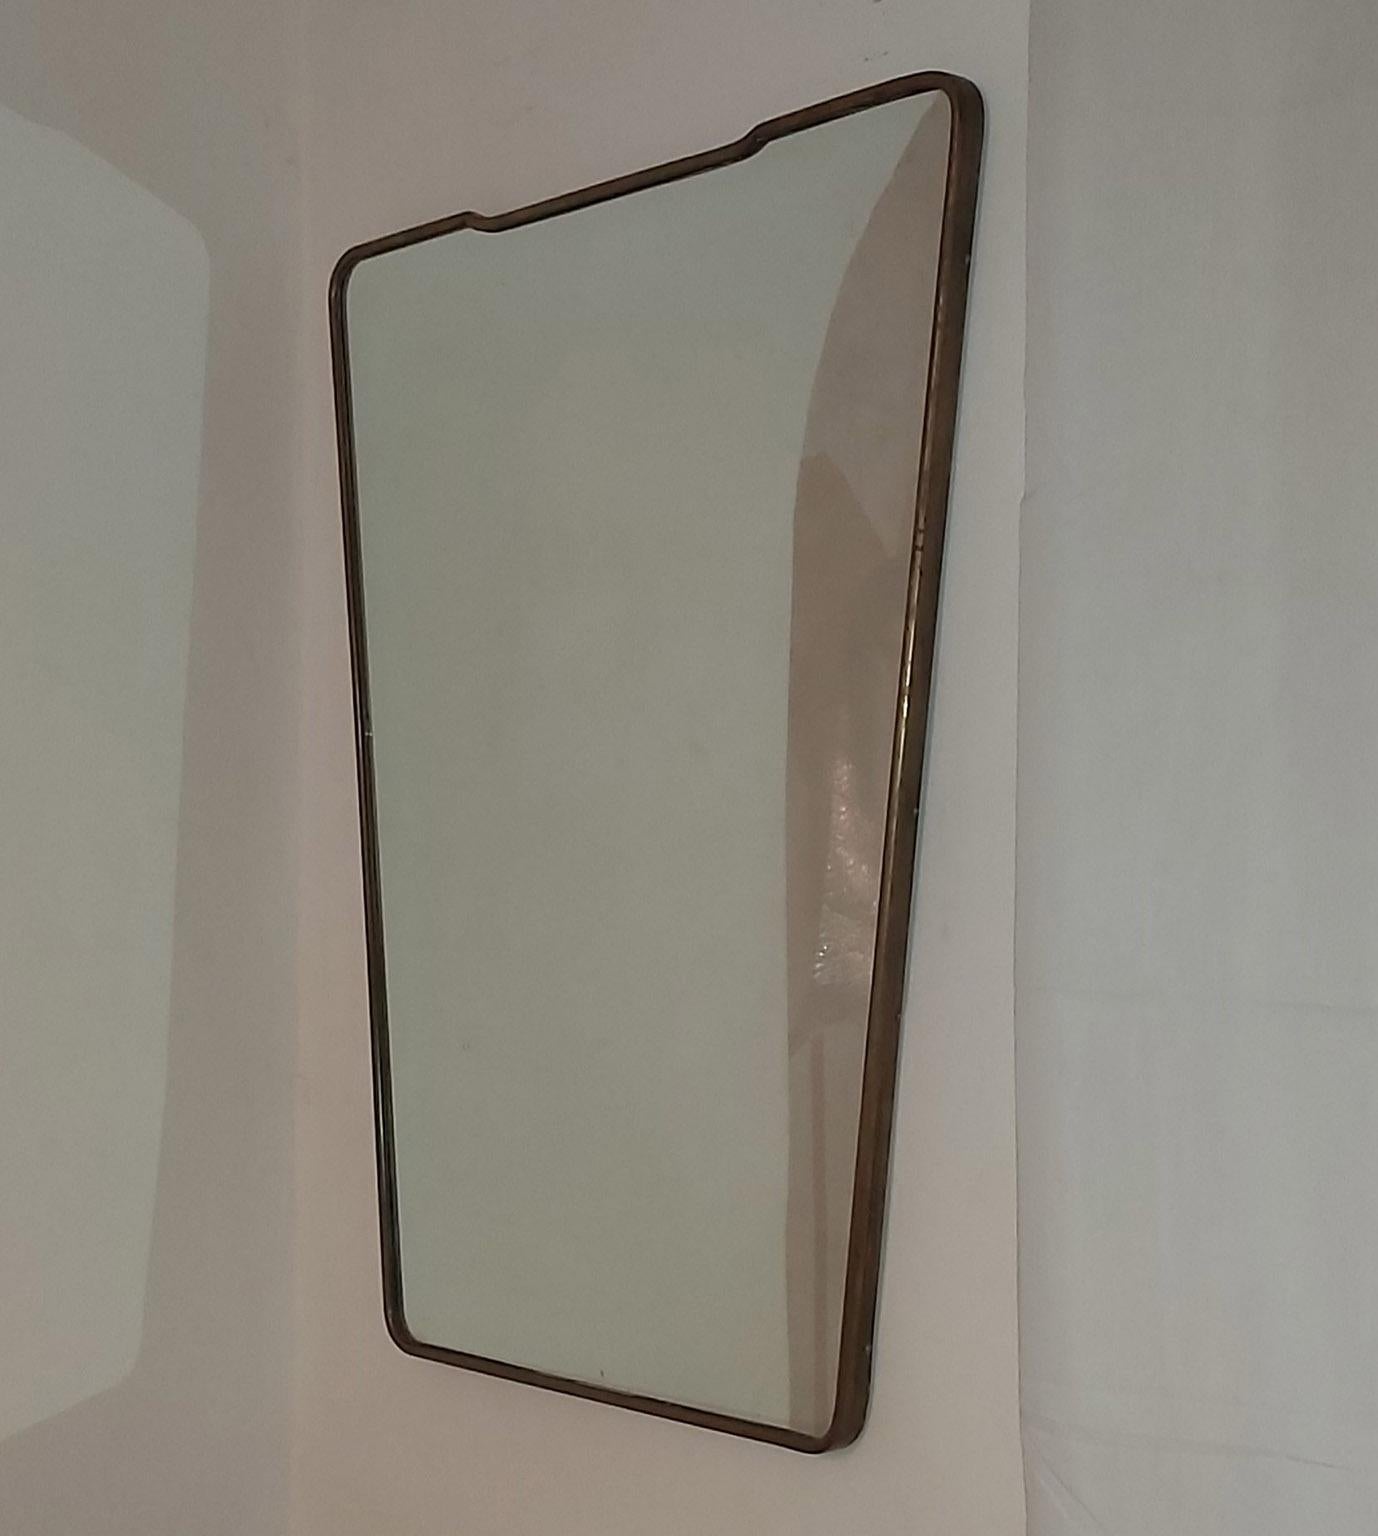 Large brass wall mirror with an elegant and unique trapezoidal shape in the style of Gio Ponti between the end of 1940s and the beginning of 1950s in Milano.
The High quality is evident from the general weight and thickness of the brass. The back is